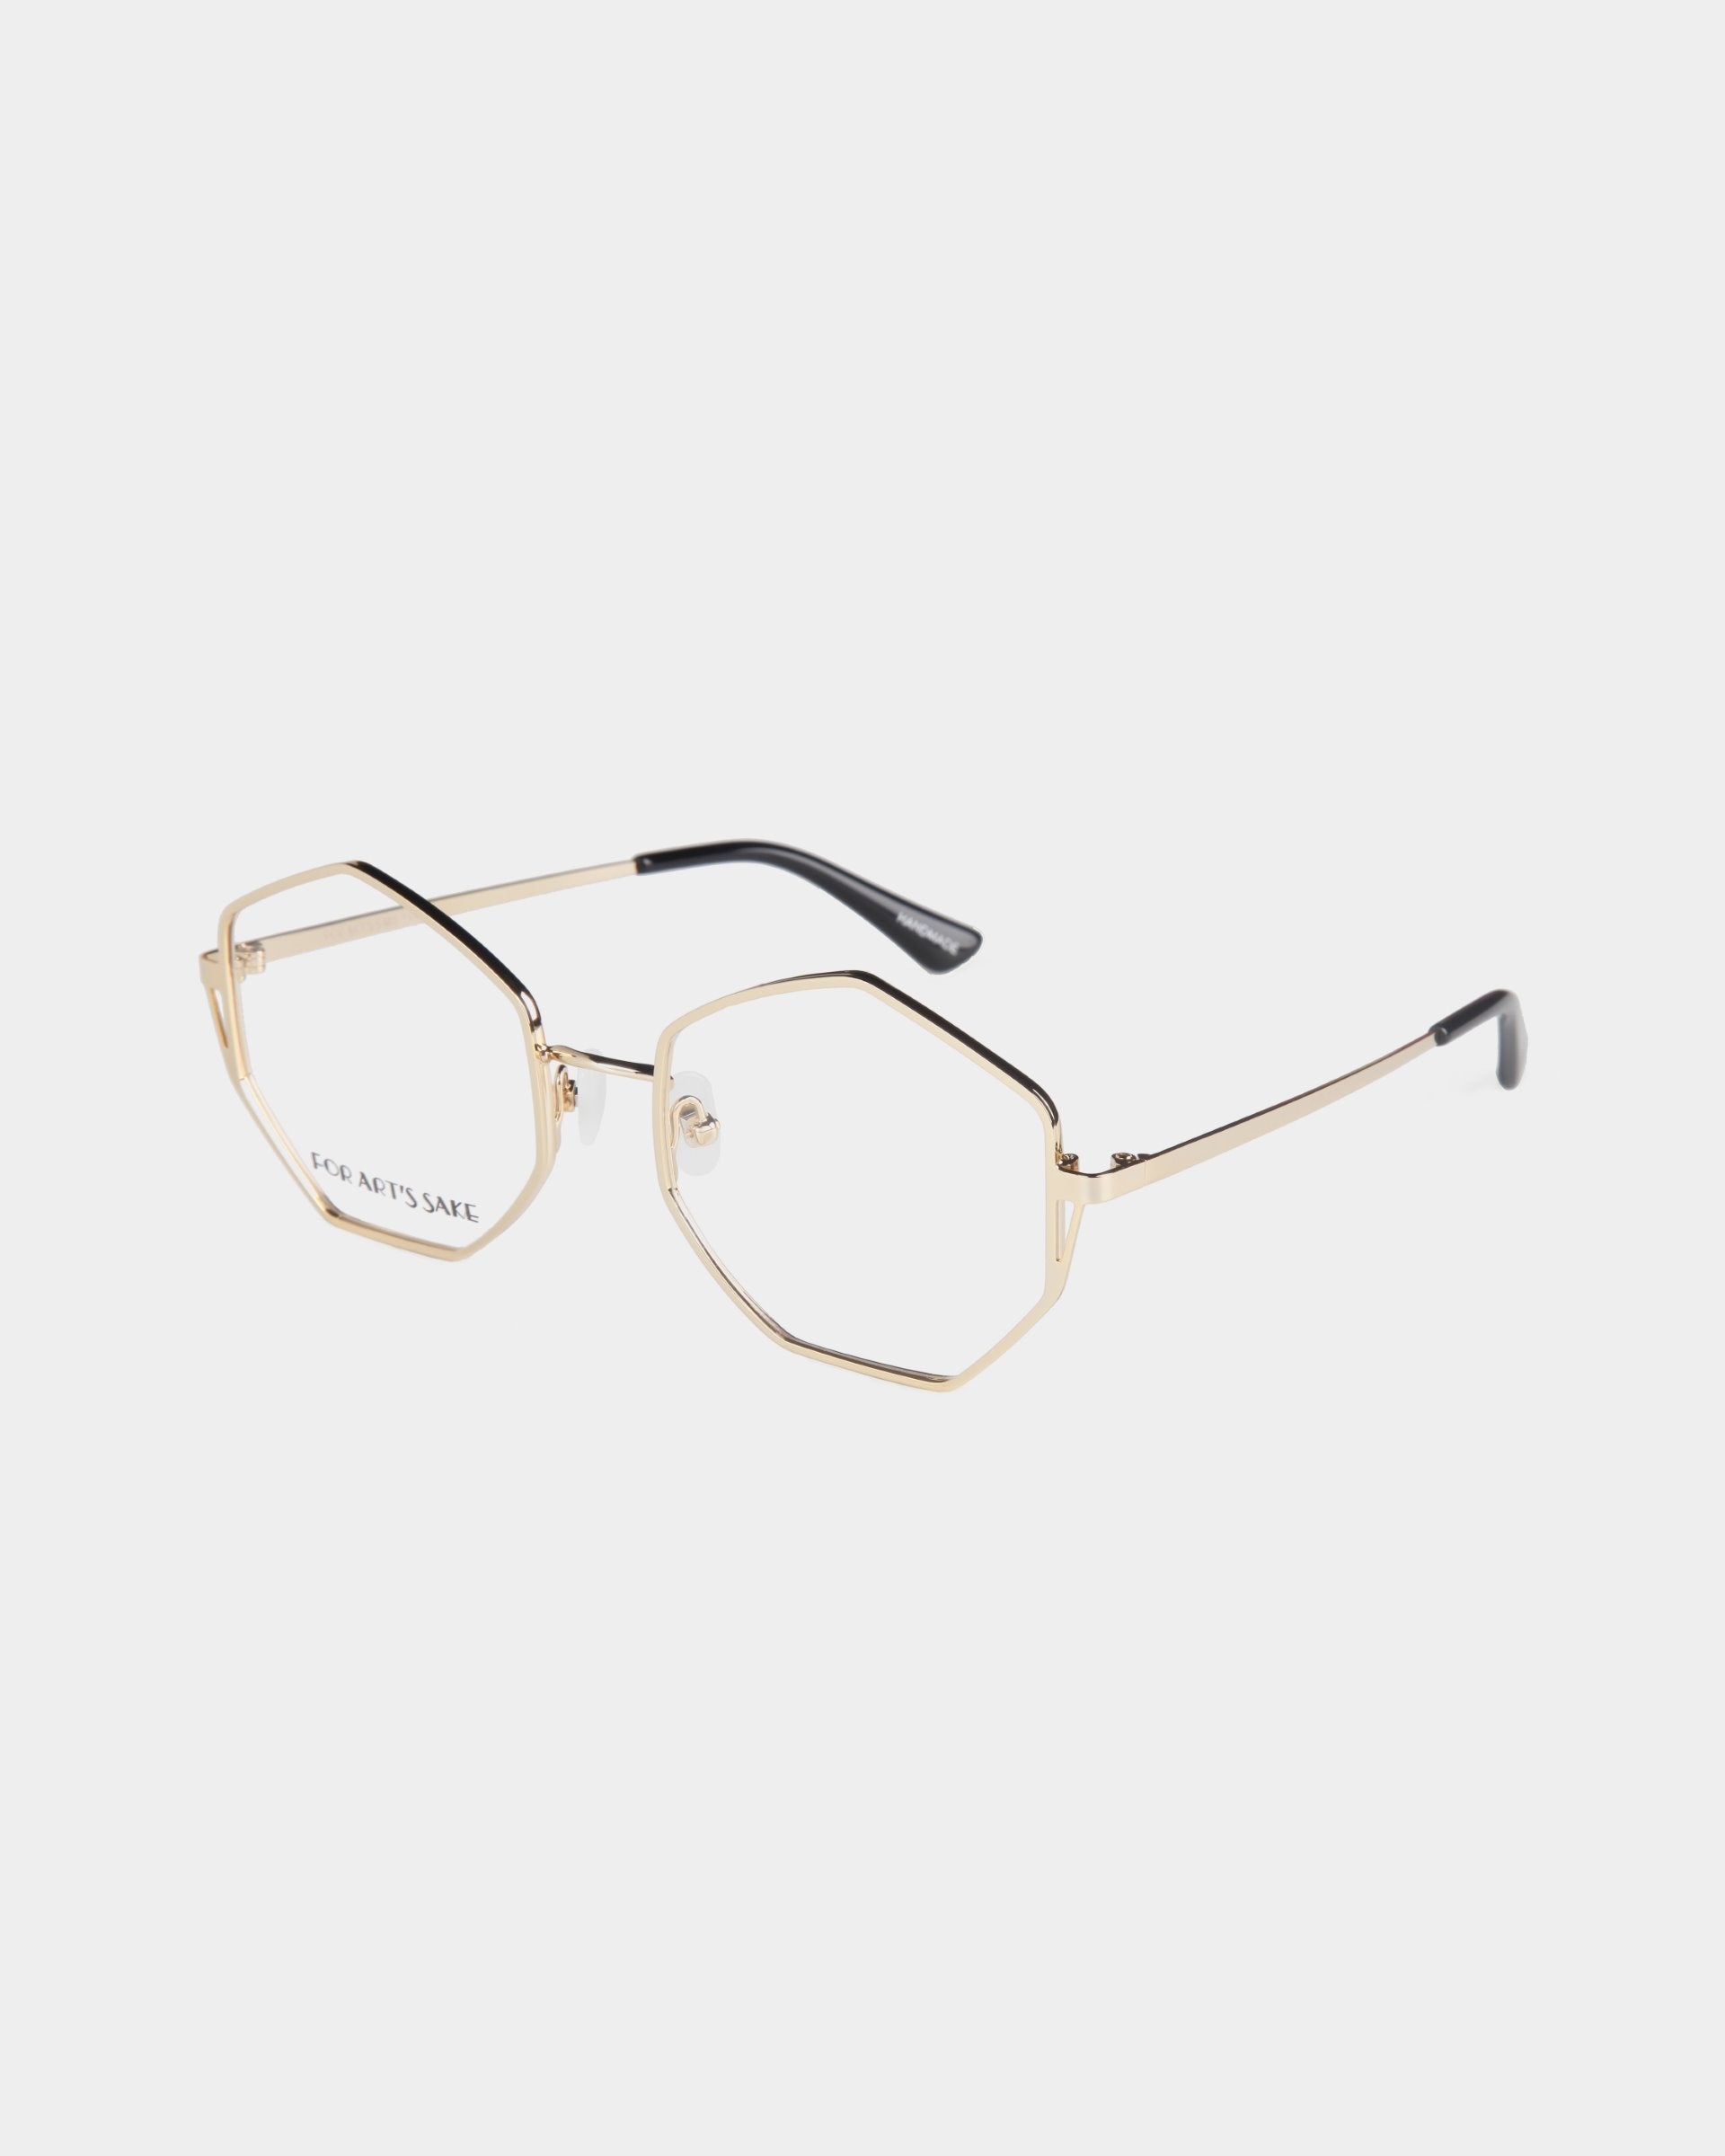 A pair of geometric gold-framed eyeglasses with heptagon-shaped lenses, black temple tips, and adjustable jade nose pads, displayed on a white background. The product name is Antidote by For Art's Sake®.